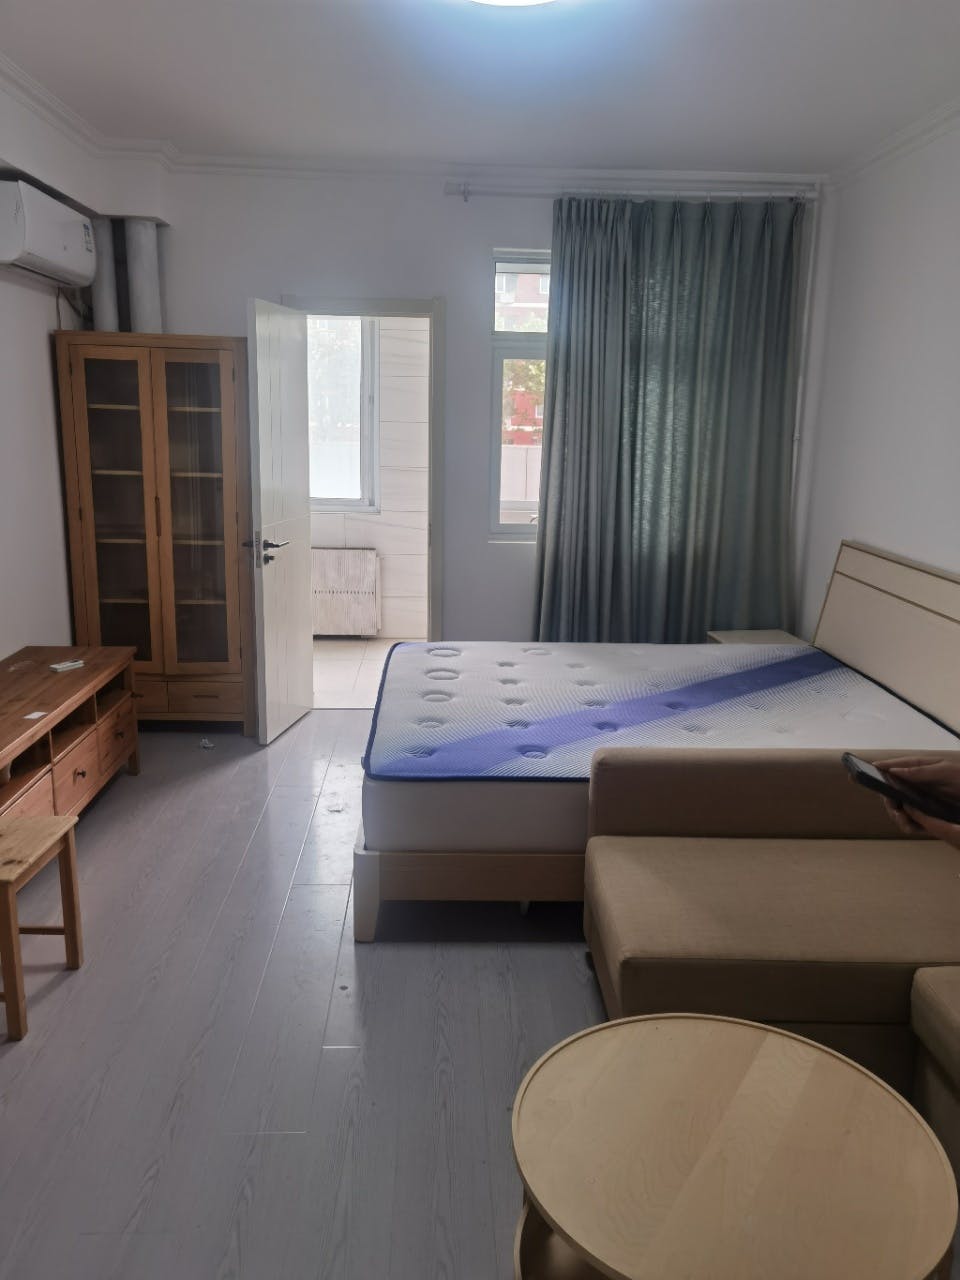 Renmin University (RUC) East Gate, Shuang'an, Youth Apartment, 2nd floor, south-facing one-bedroom